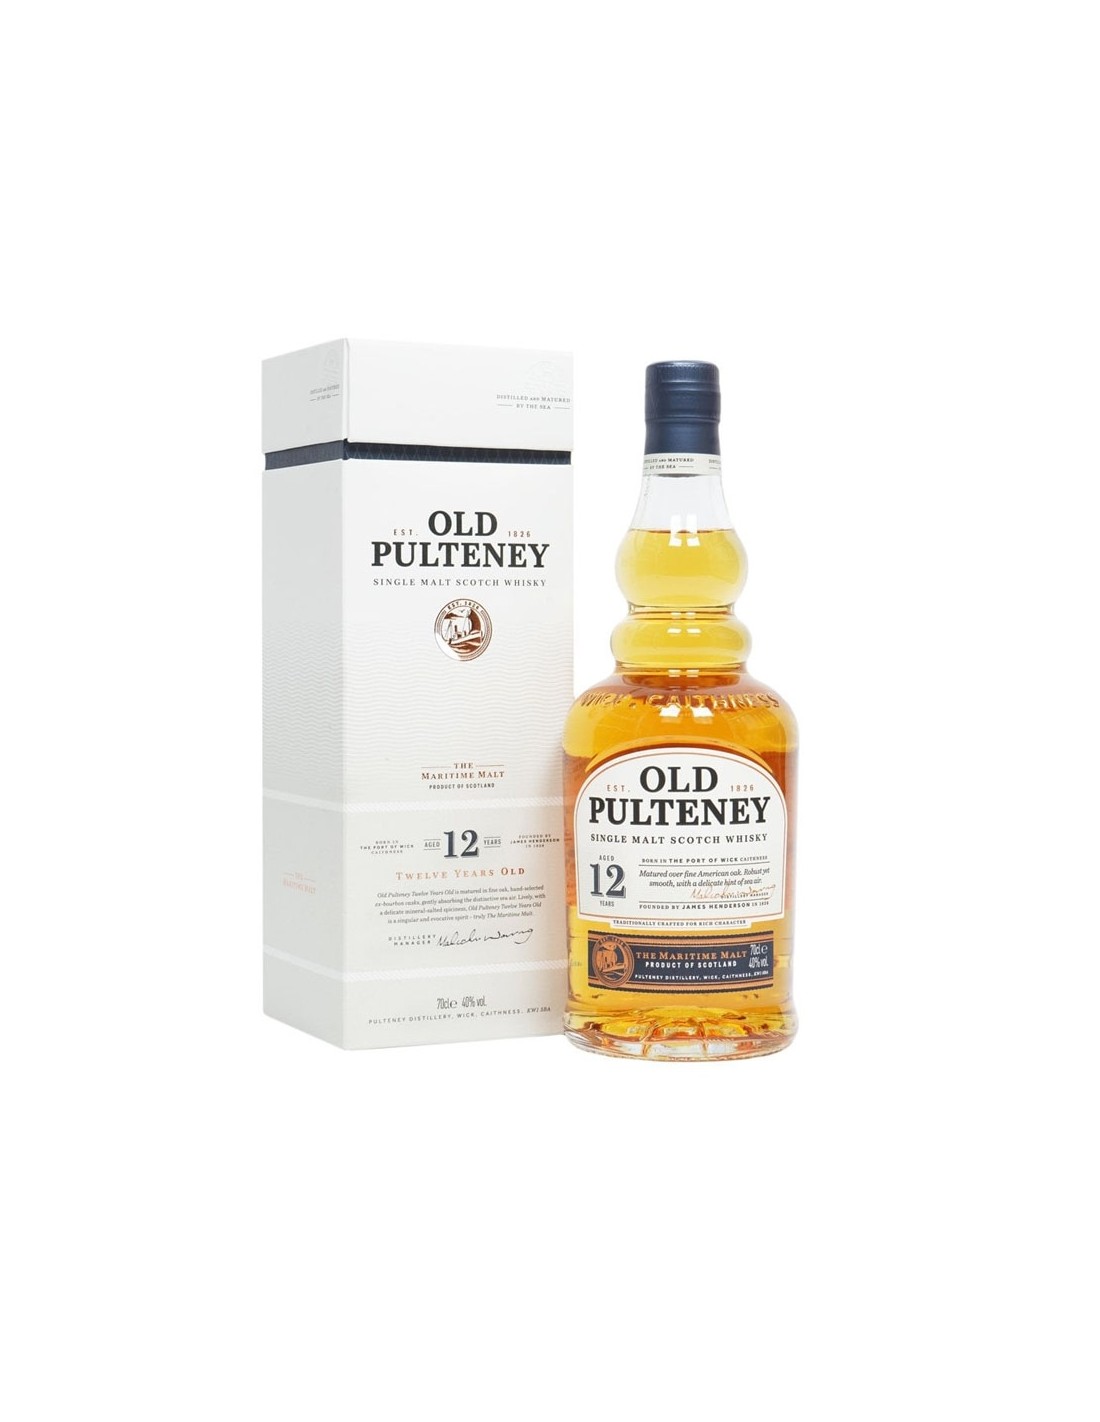 Whisky Old Pulteney 0.7L, 12 ani, 40% alc., Scotia alcooldiscount.ro